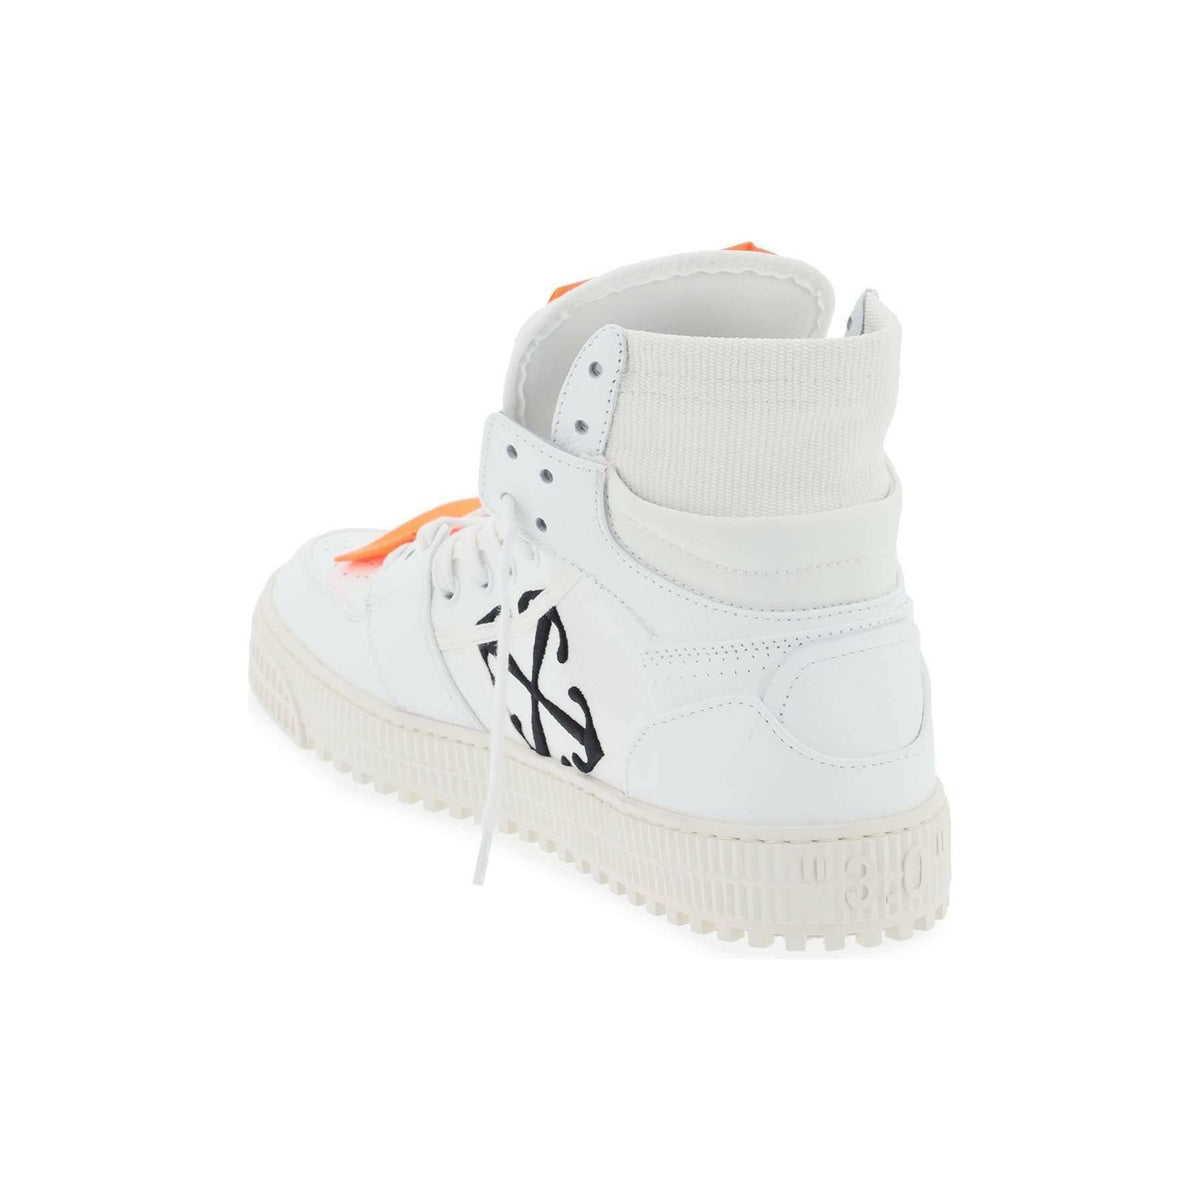 OFF-WHITE - White and Orange '3.0 Off Court' Leather High-Top Sneakers - JOHN JULIA